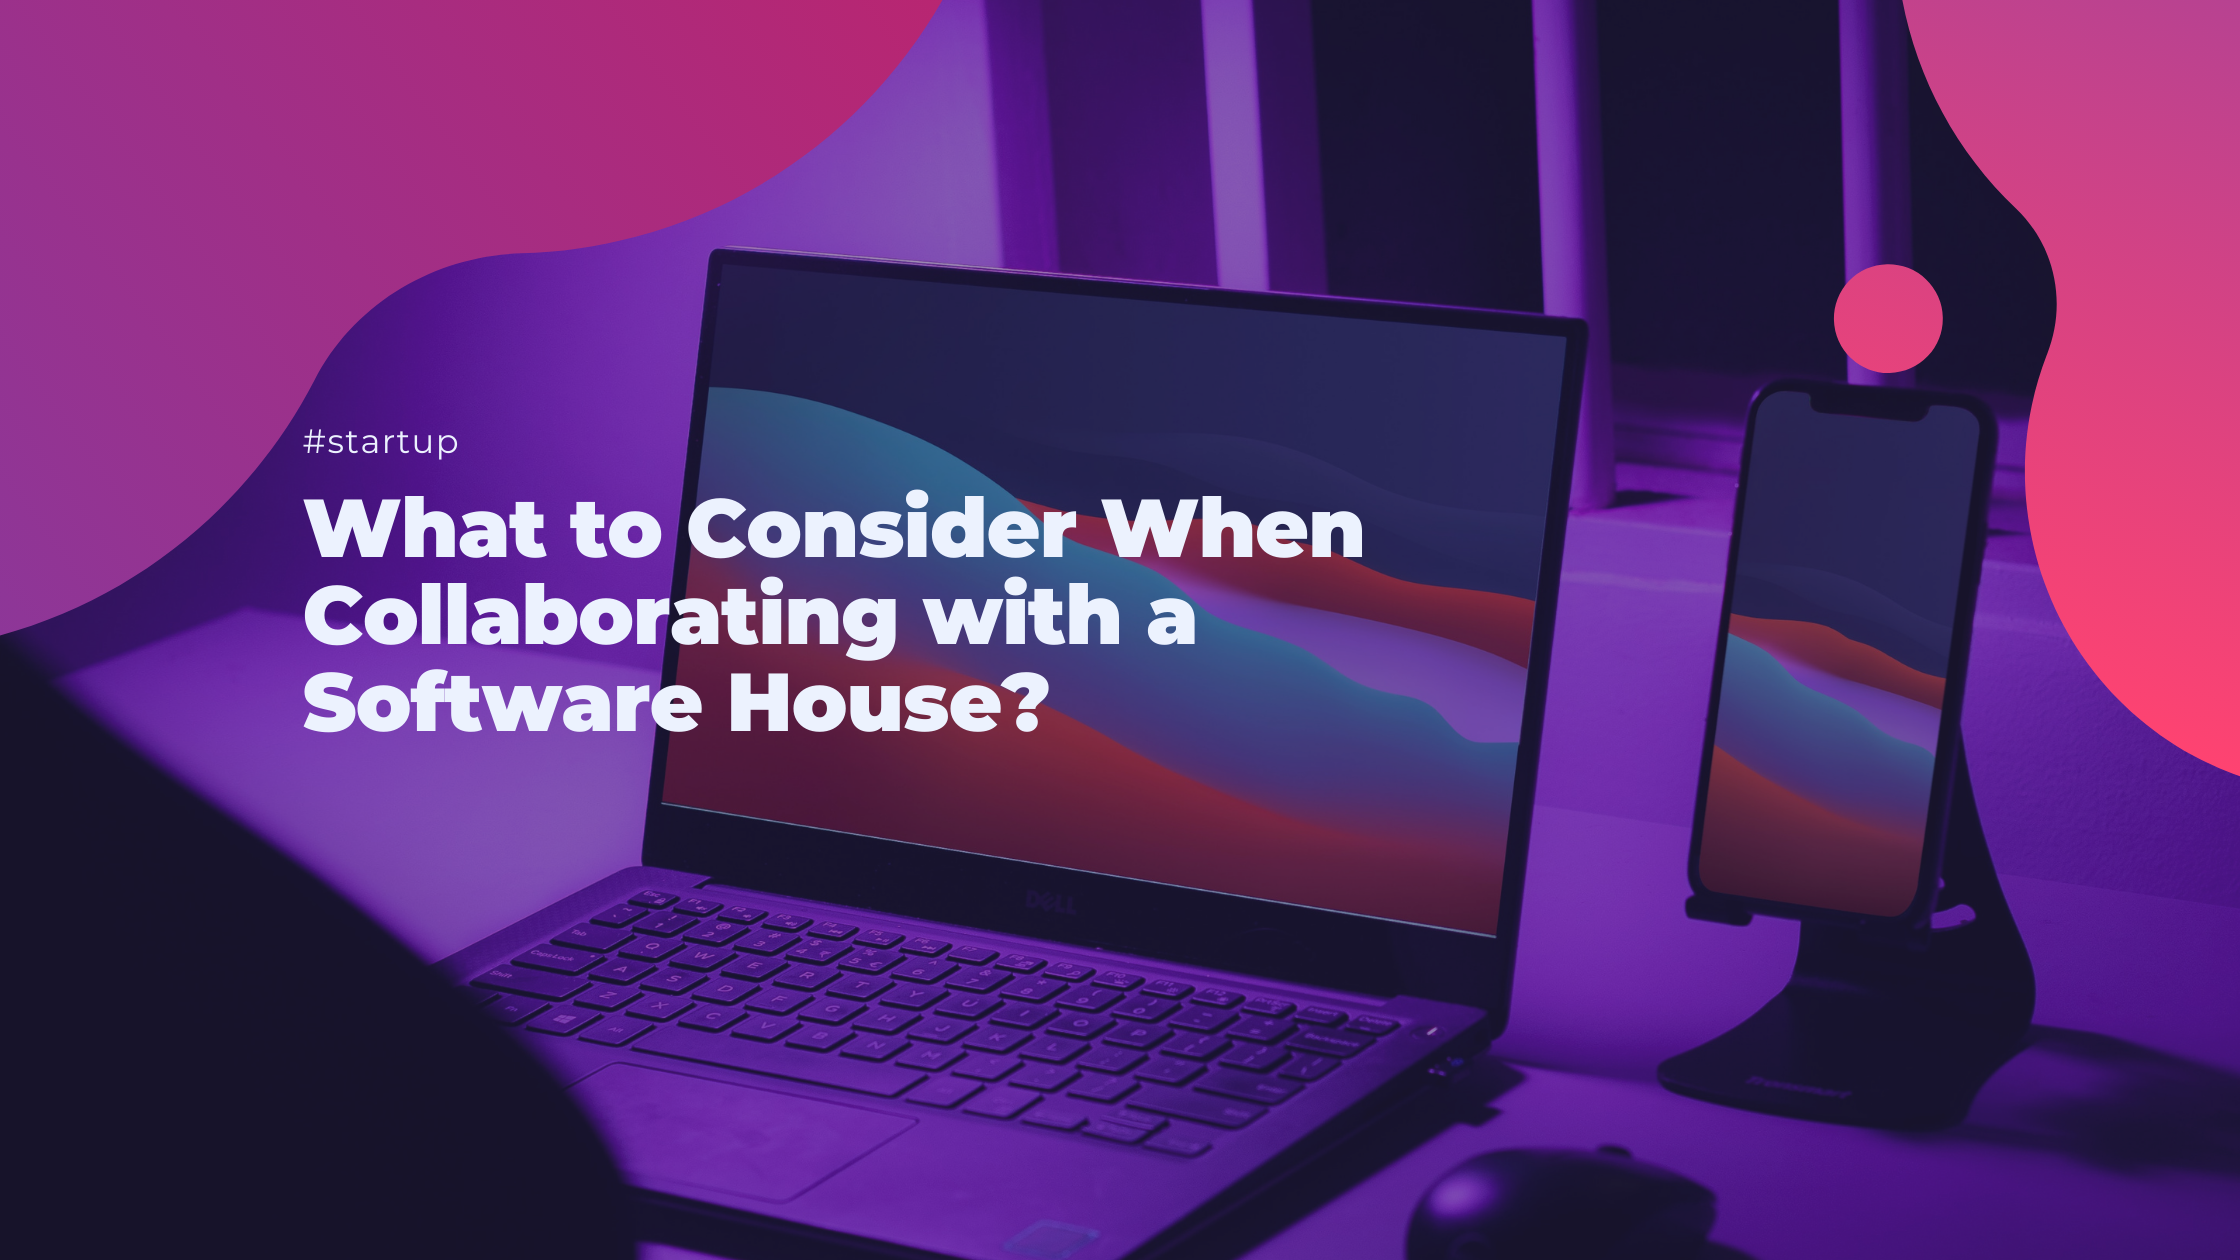 What to consider when collaborating with a software house?